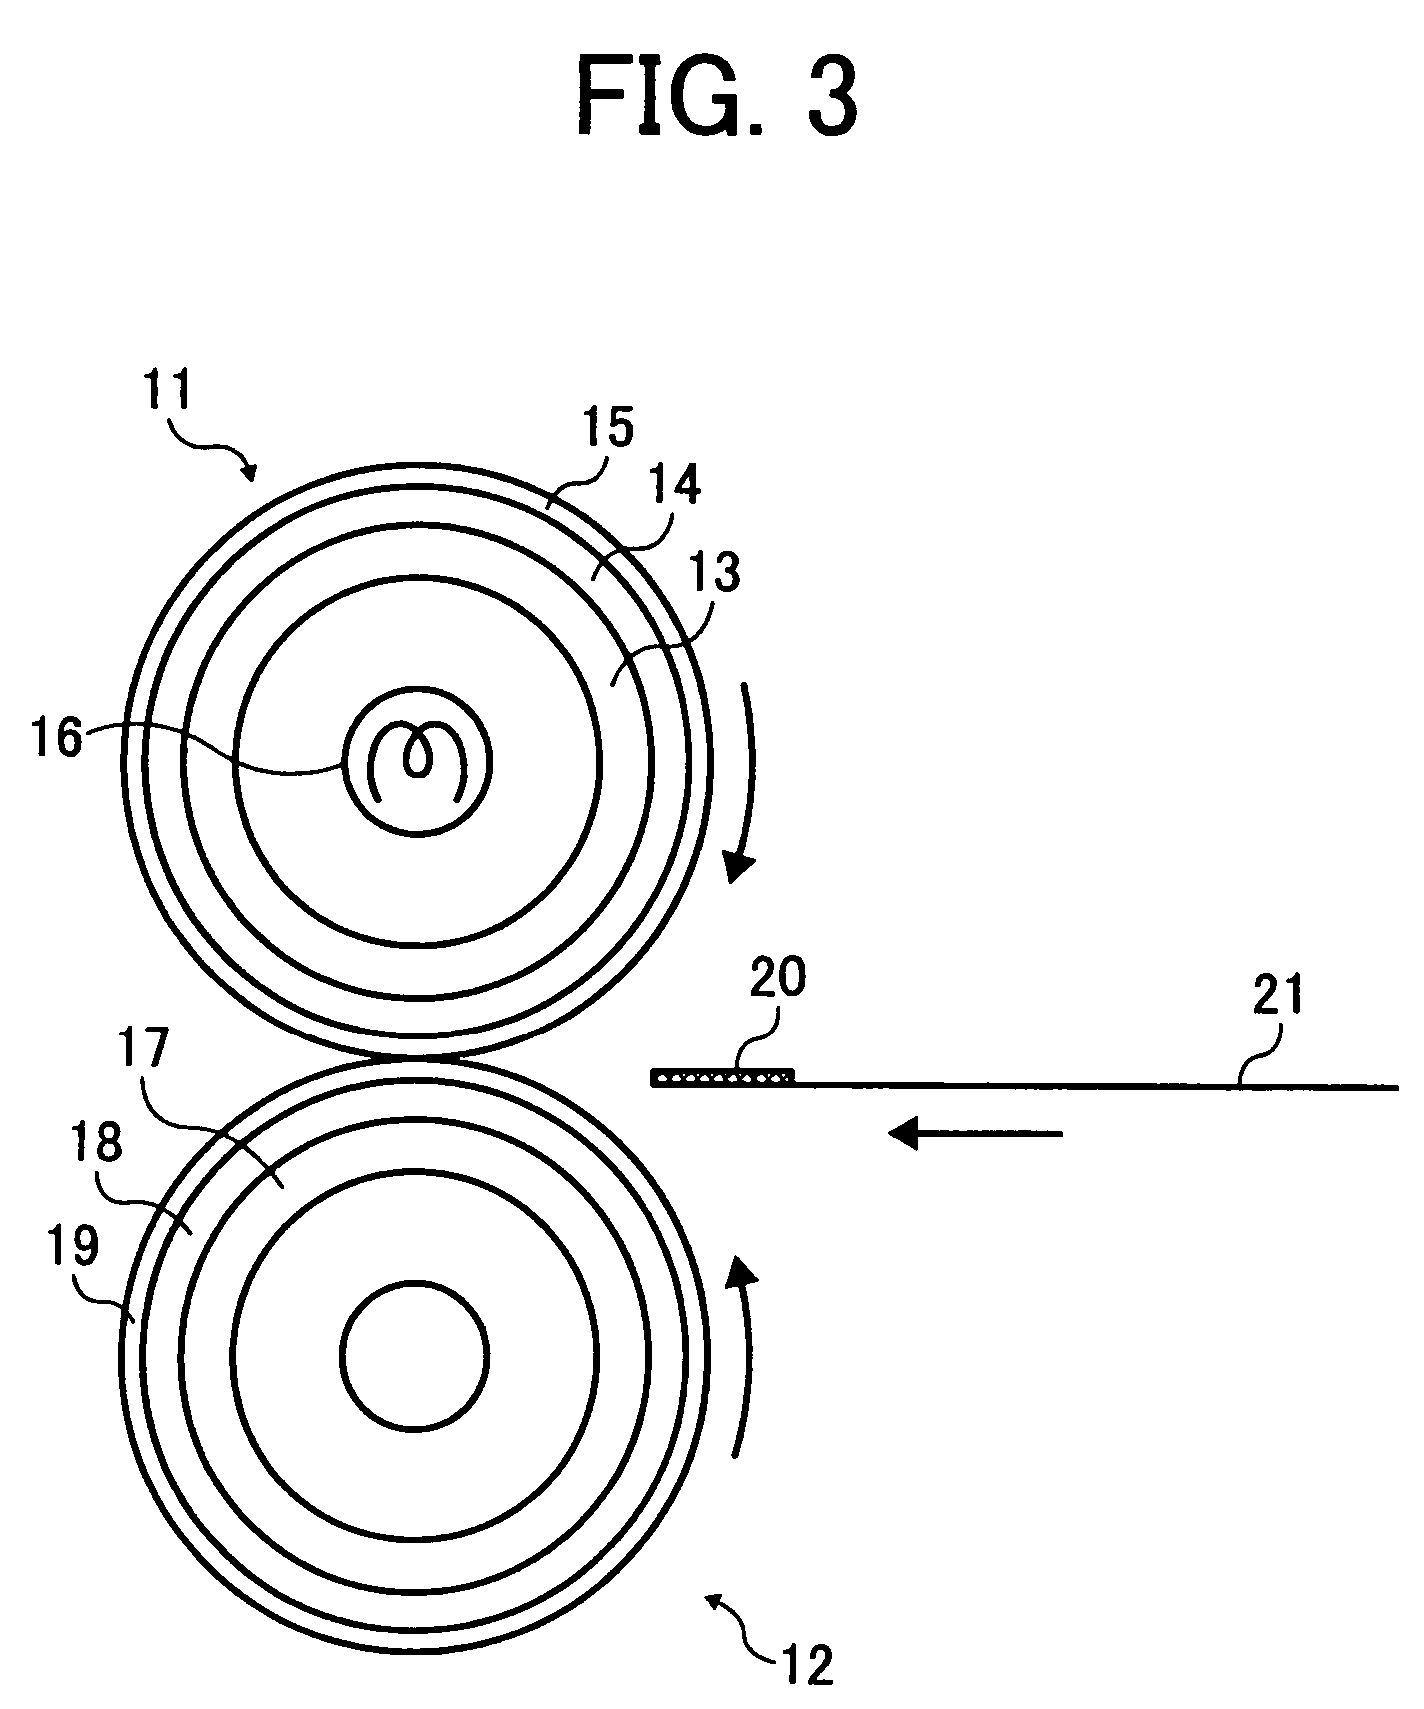 Toner and method of manufacturing the same